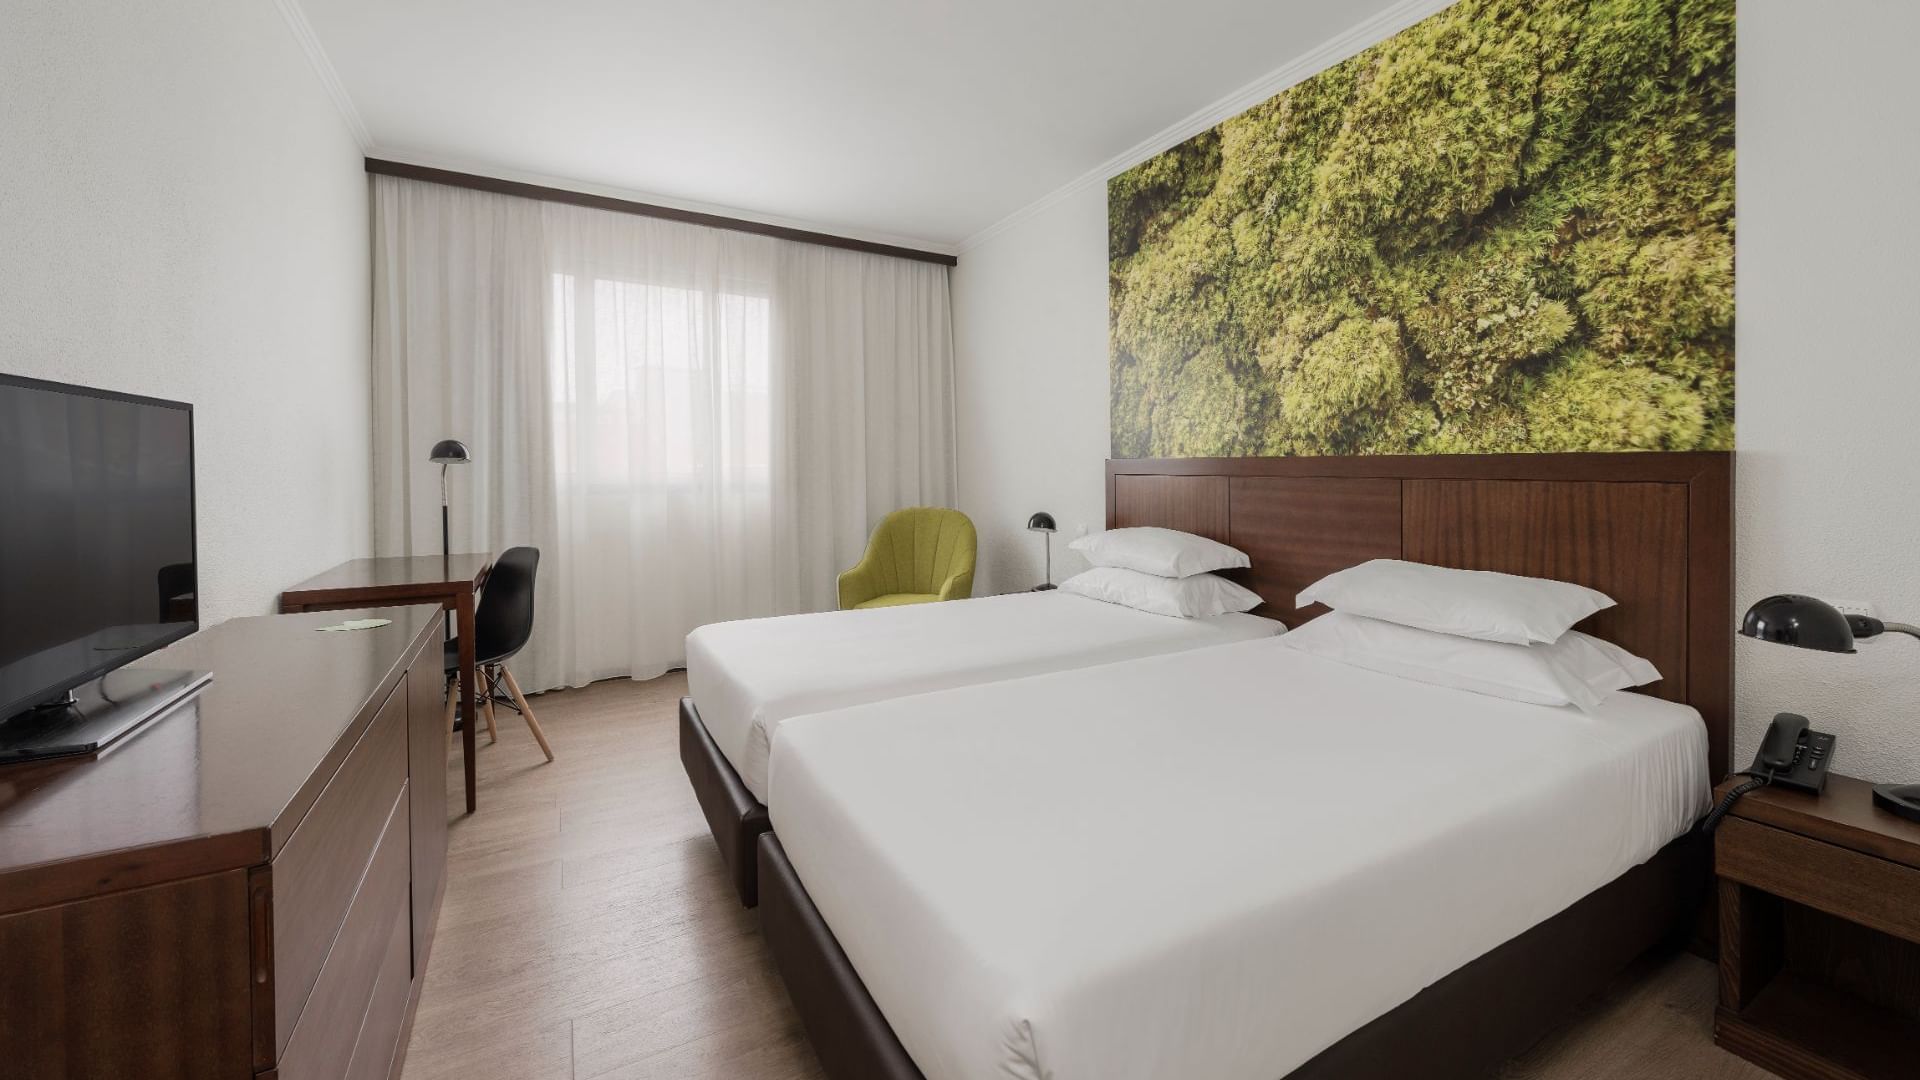 Standard Double room with two beds and TV, Bensaude Hotels